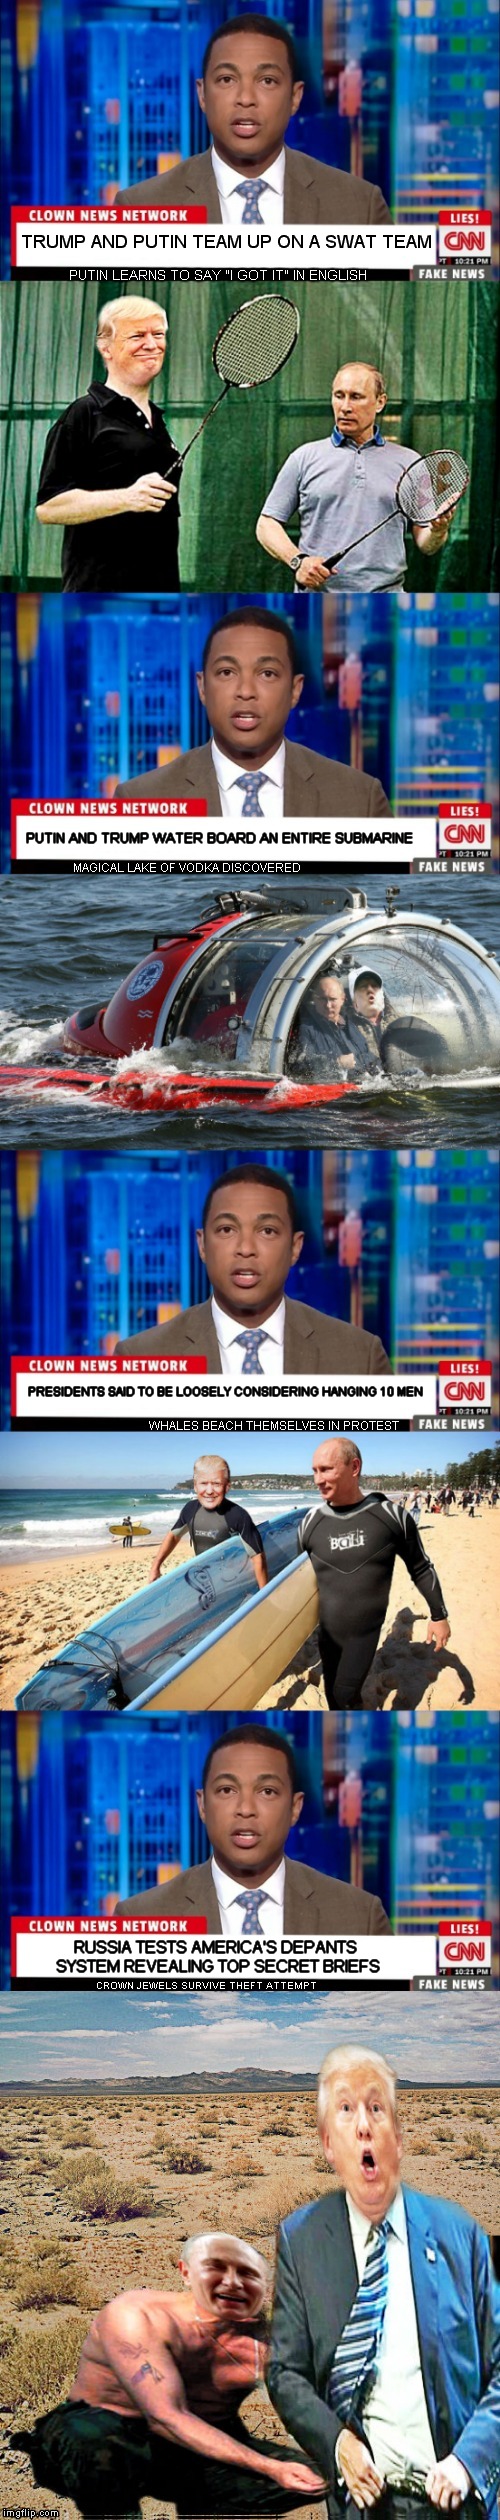 News anyone?? |  PRESIDENTS SAID TO BE LOOSELY CONSIDERING HANGING 10 MEN; WHALES BEACH THEMSELVES IN PROTEST; RUSSIA TESTS AMERICA'S DEPANTS SYSTEM REVEALING TOP SECRET BRIEFS; CROWN JEWELS SURVIVE THEFT ATTEMPT | image tagged in fake news,cnn fake news,cnn spins trump news | made w/ Imgflip meme maker